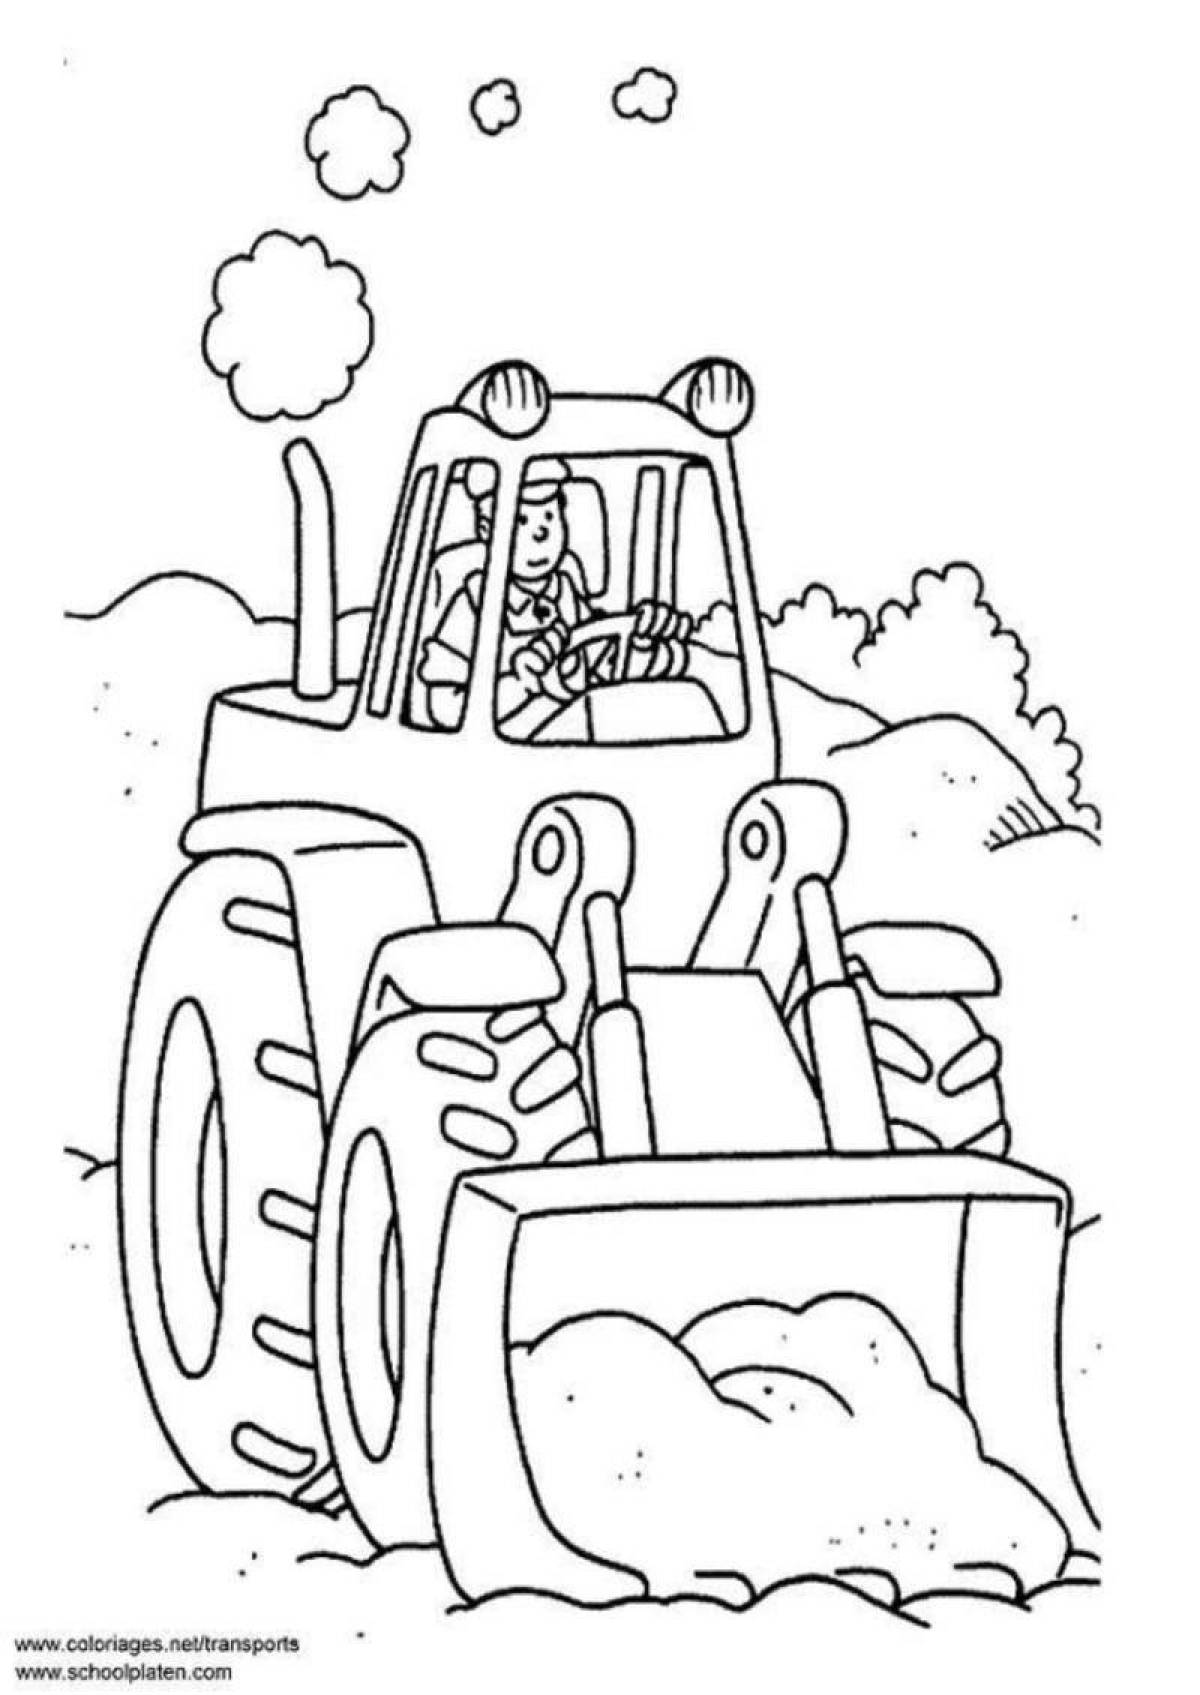 Majestic snowplow coloring page